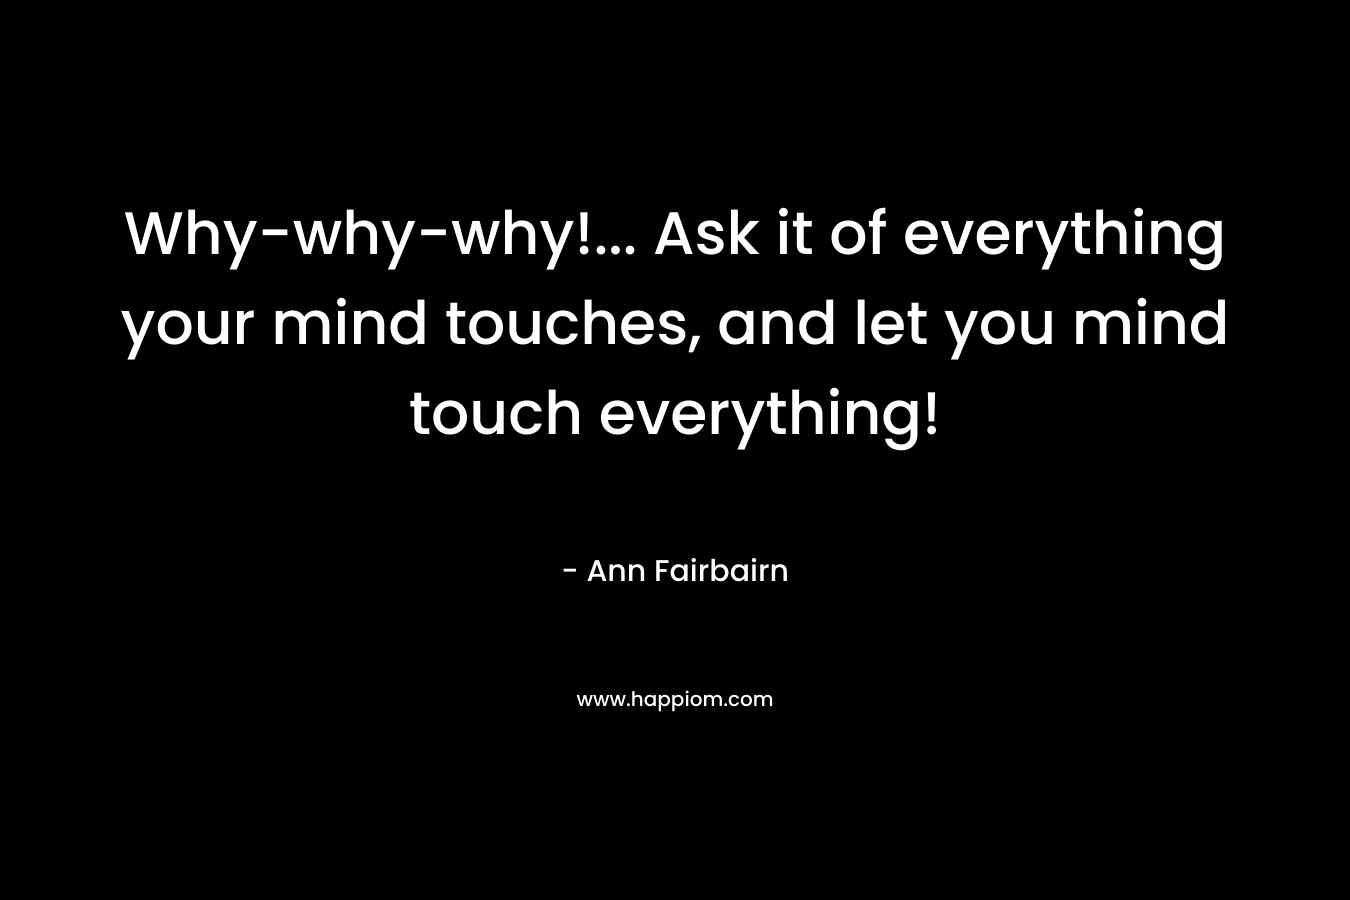 Why-why-why!... Ask it of everything your mind touches, and let you mind touch everything!